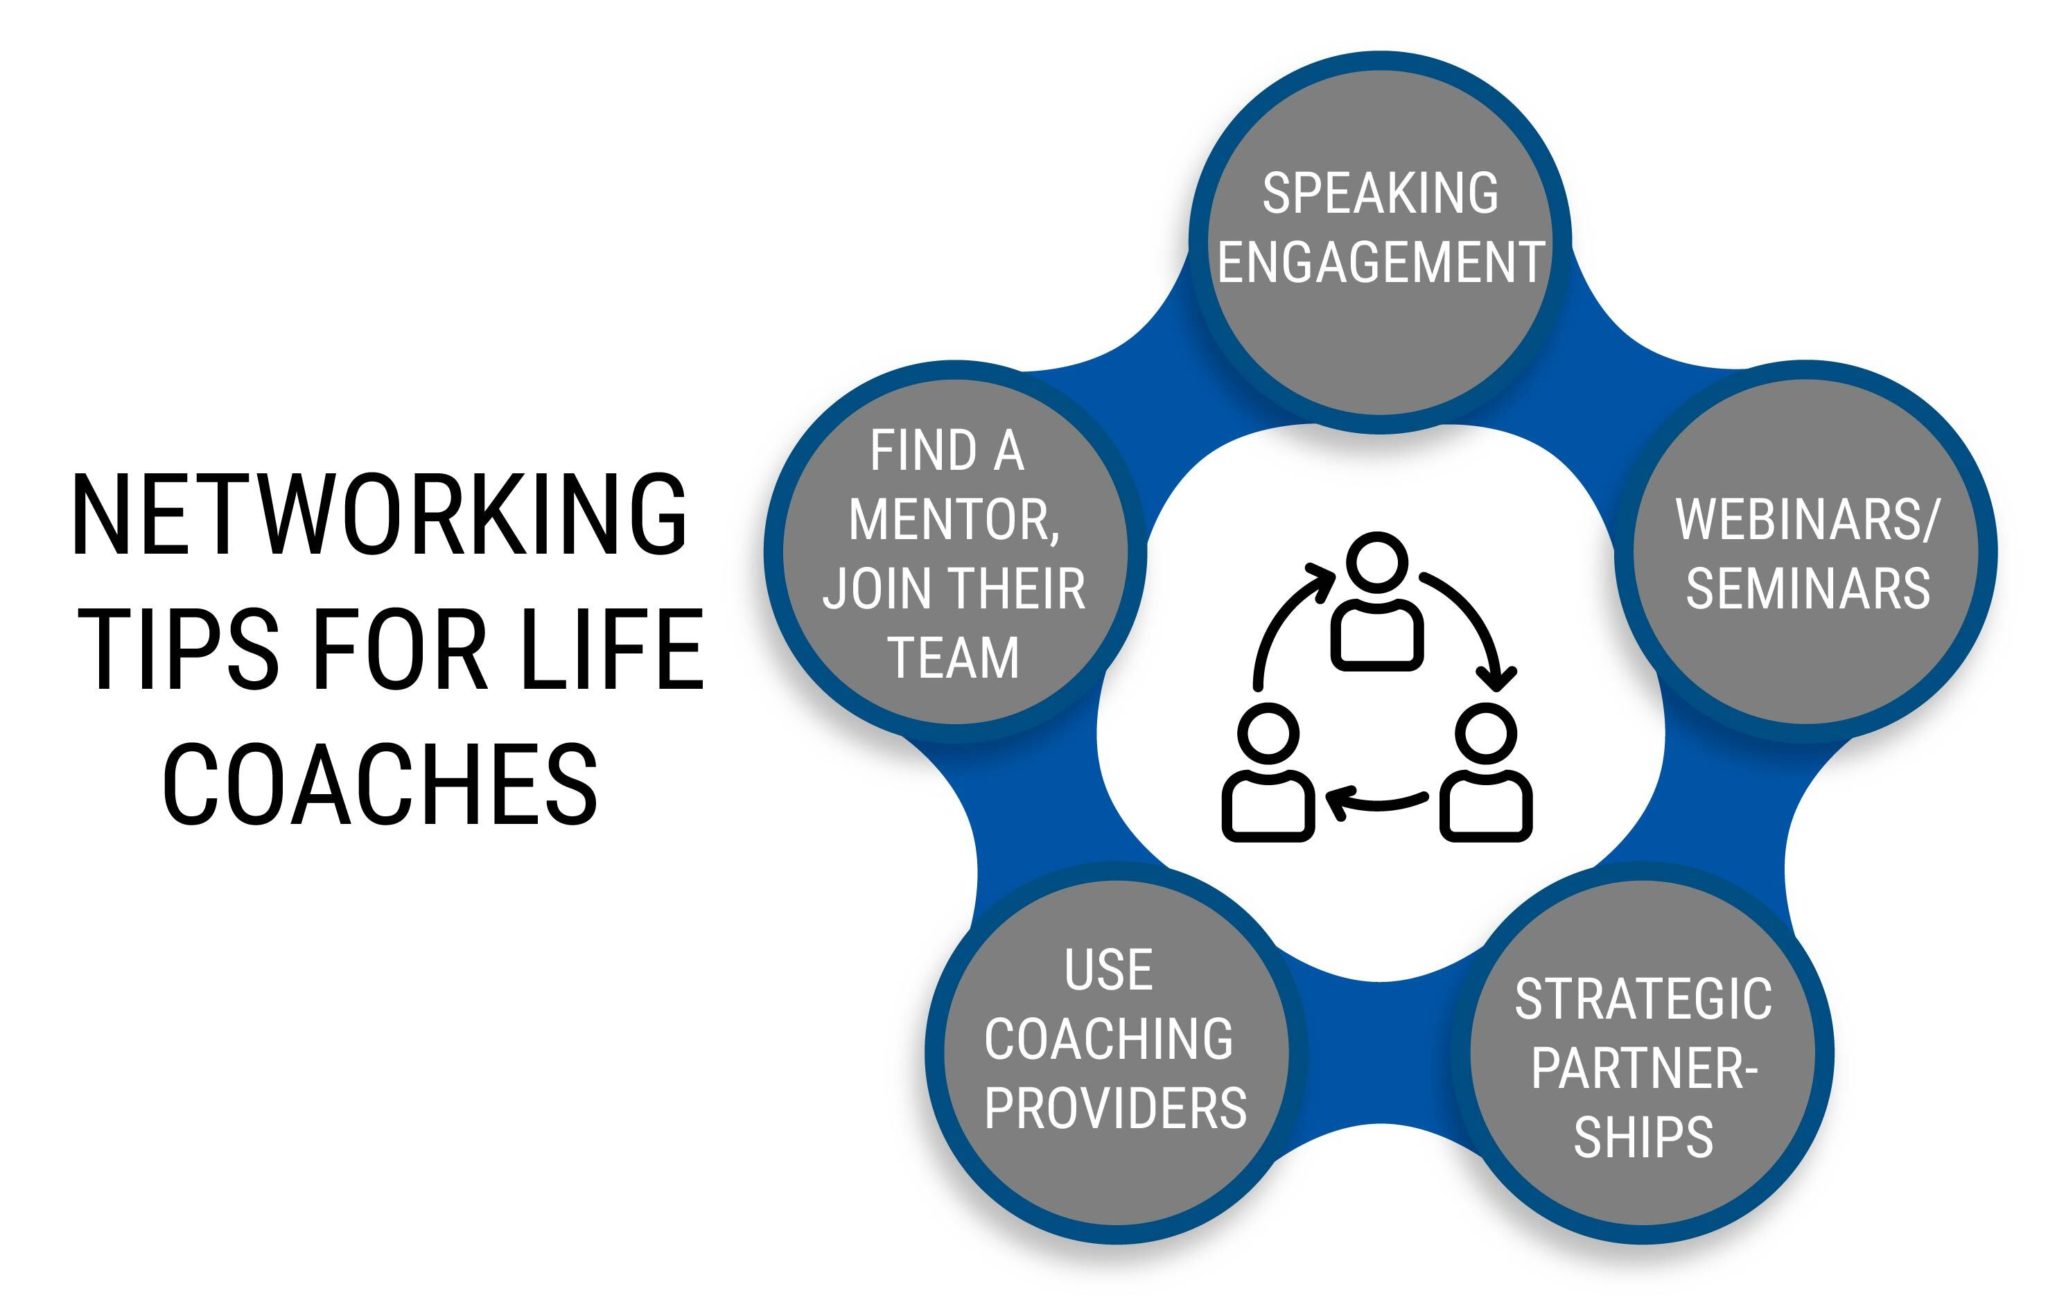 NETWORKING TIPS FOR LIFE COACHES